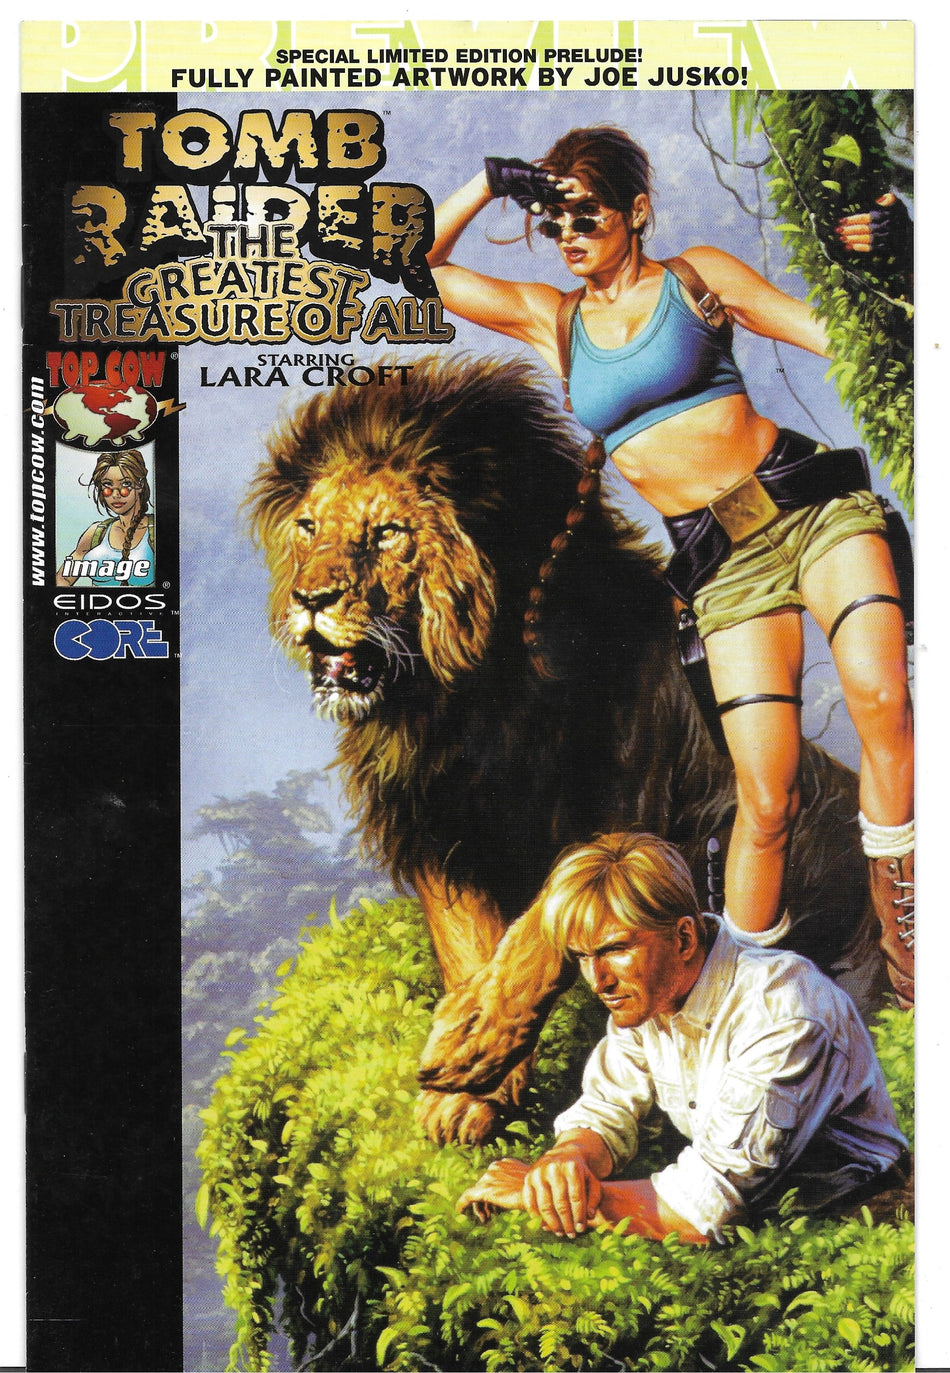 Photo of Tomb Raider the Greatest Treasure of All Prelude comic Sold by Stronghold Collectibles